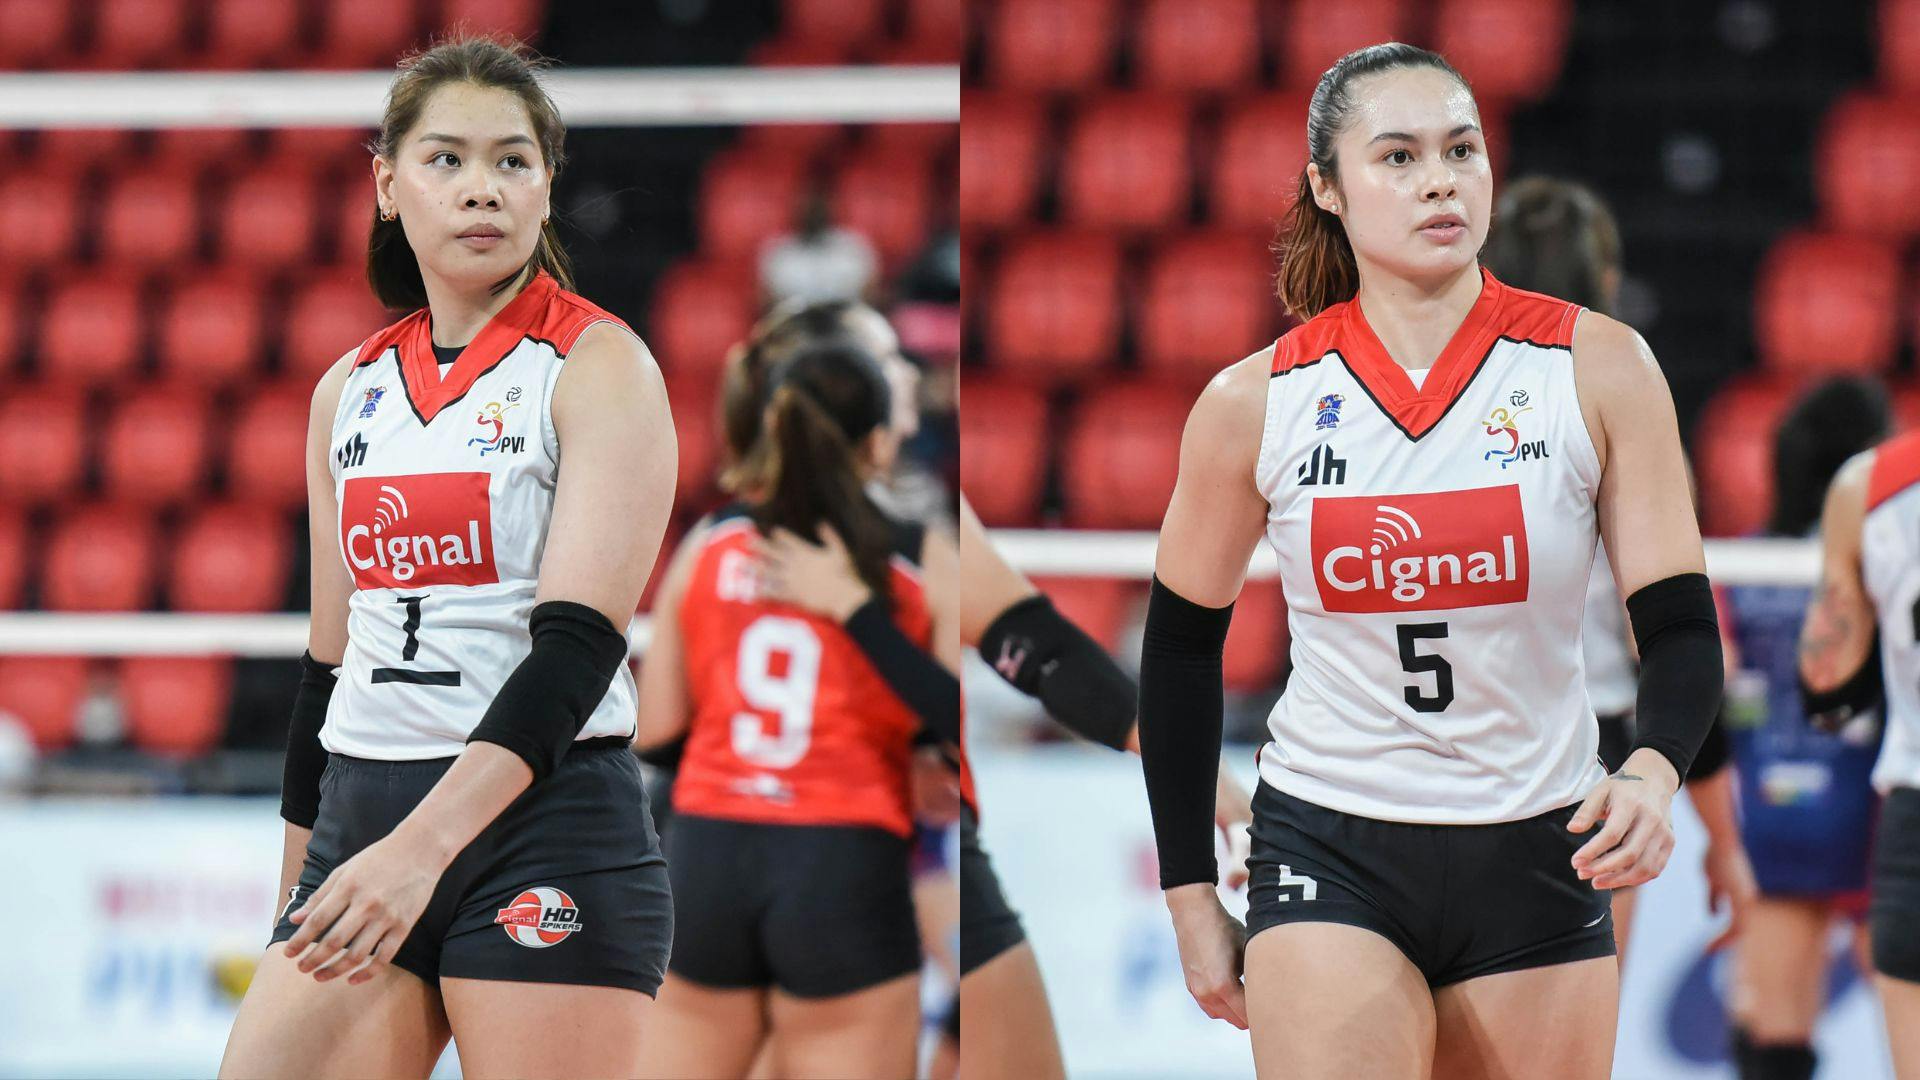 Ces Molina, Vanie Gandler share focus for Cignal ahead of semifinals after dominating sweep of Gerflor